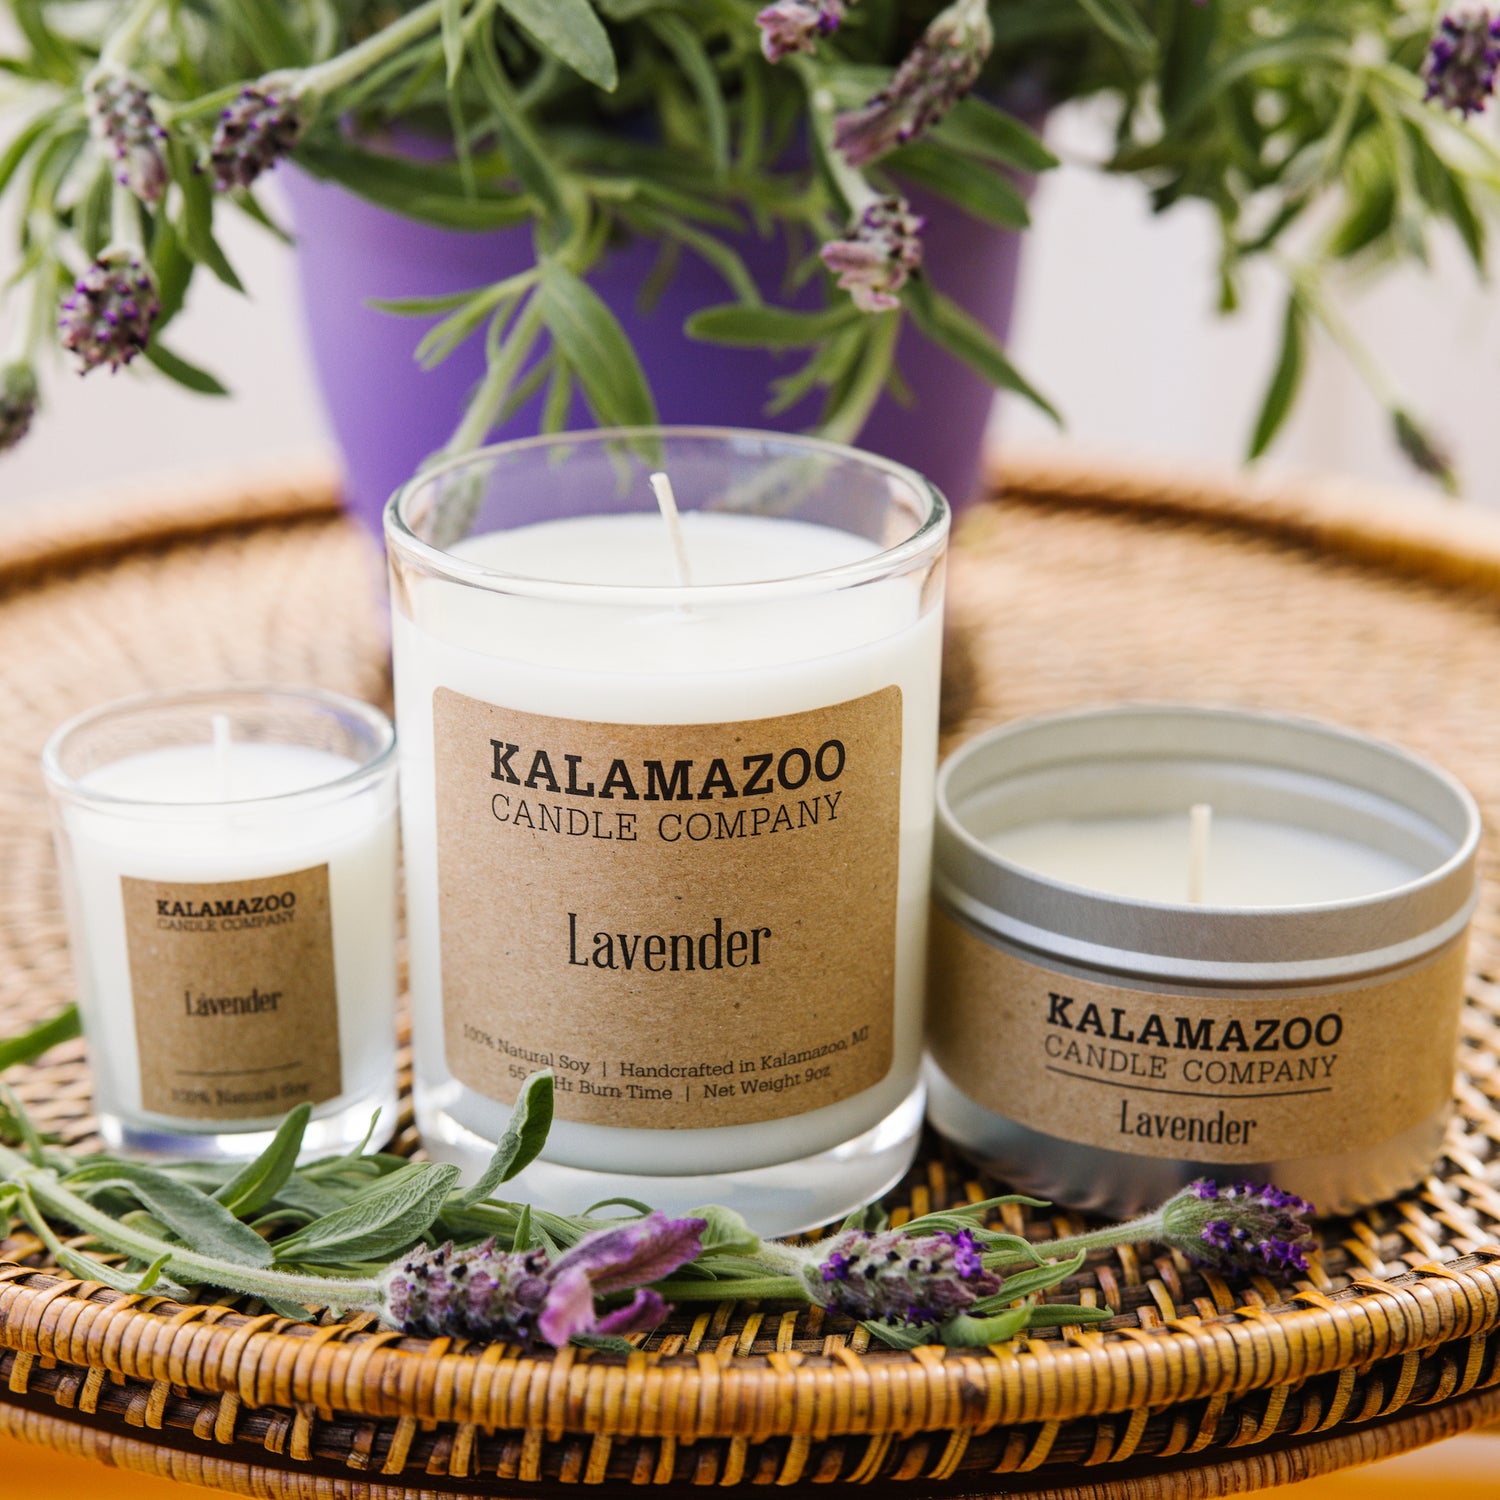 Image showing 3 lavender candles on a clean table.